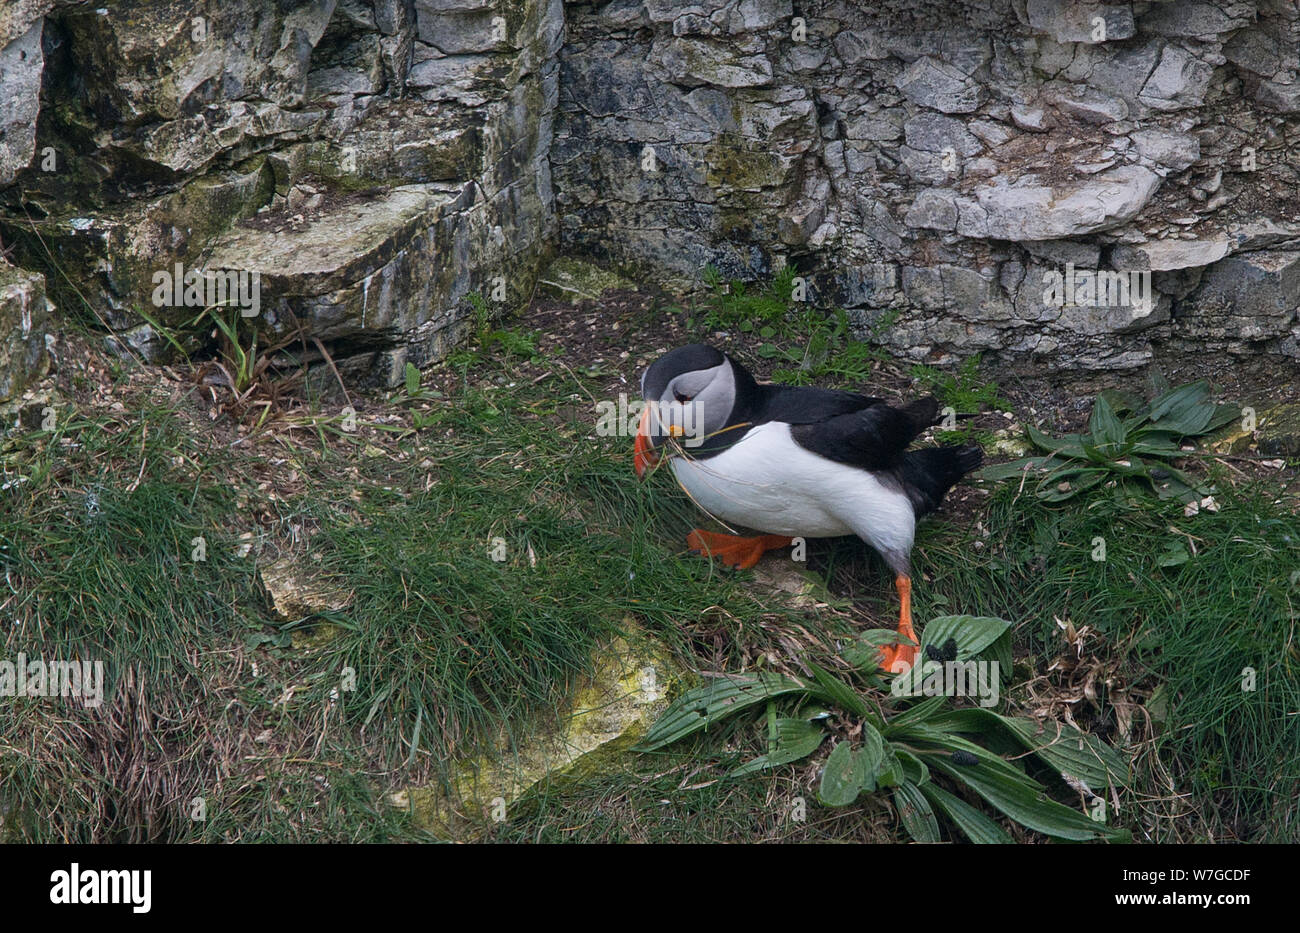 Puffin on cliff ledge with features and colourful plumage in full view Stock Photo